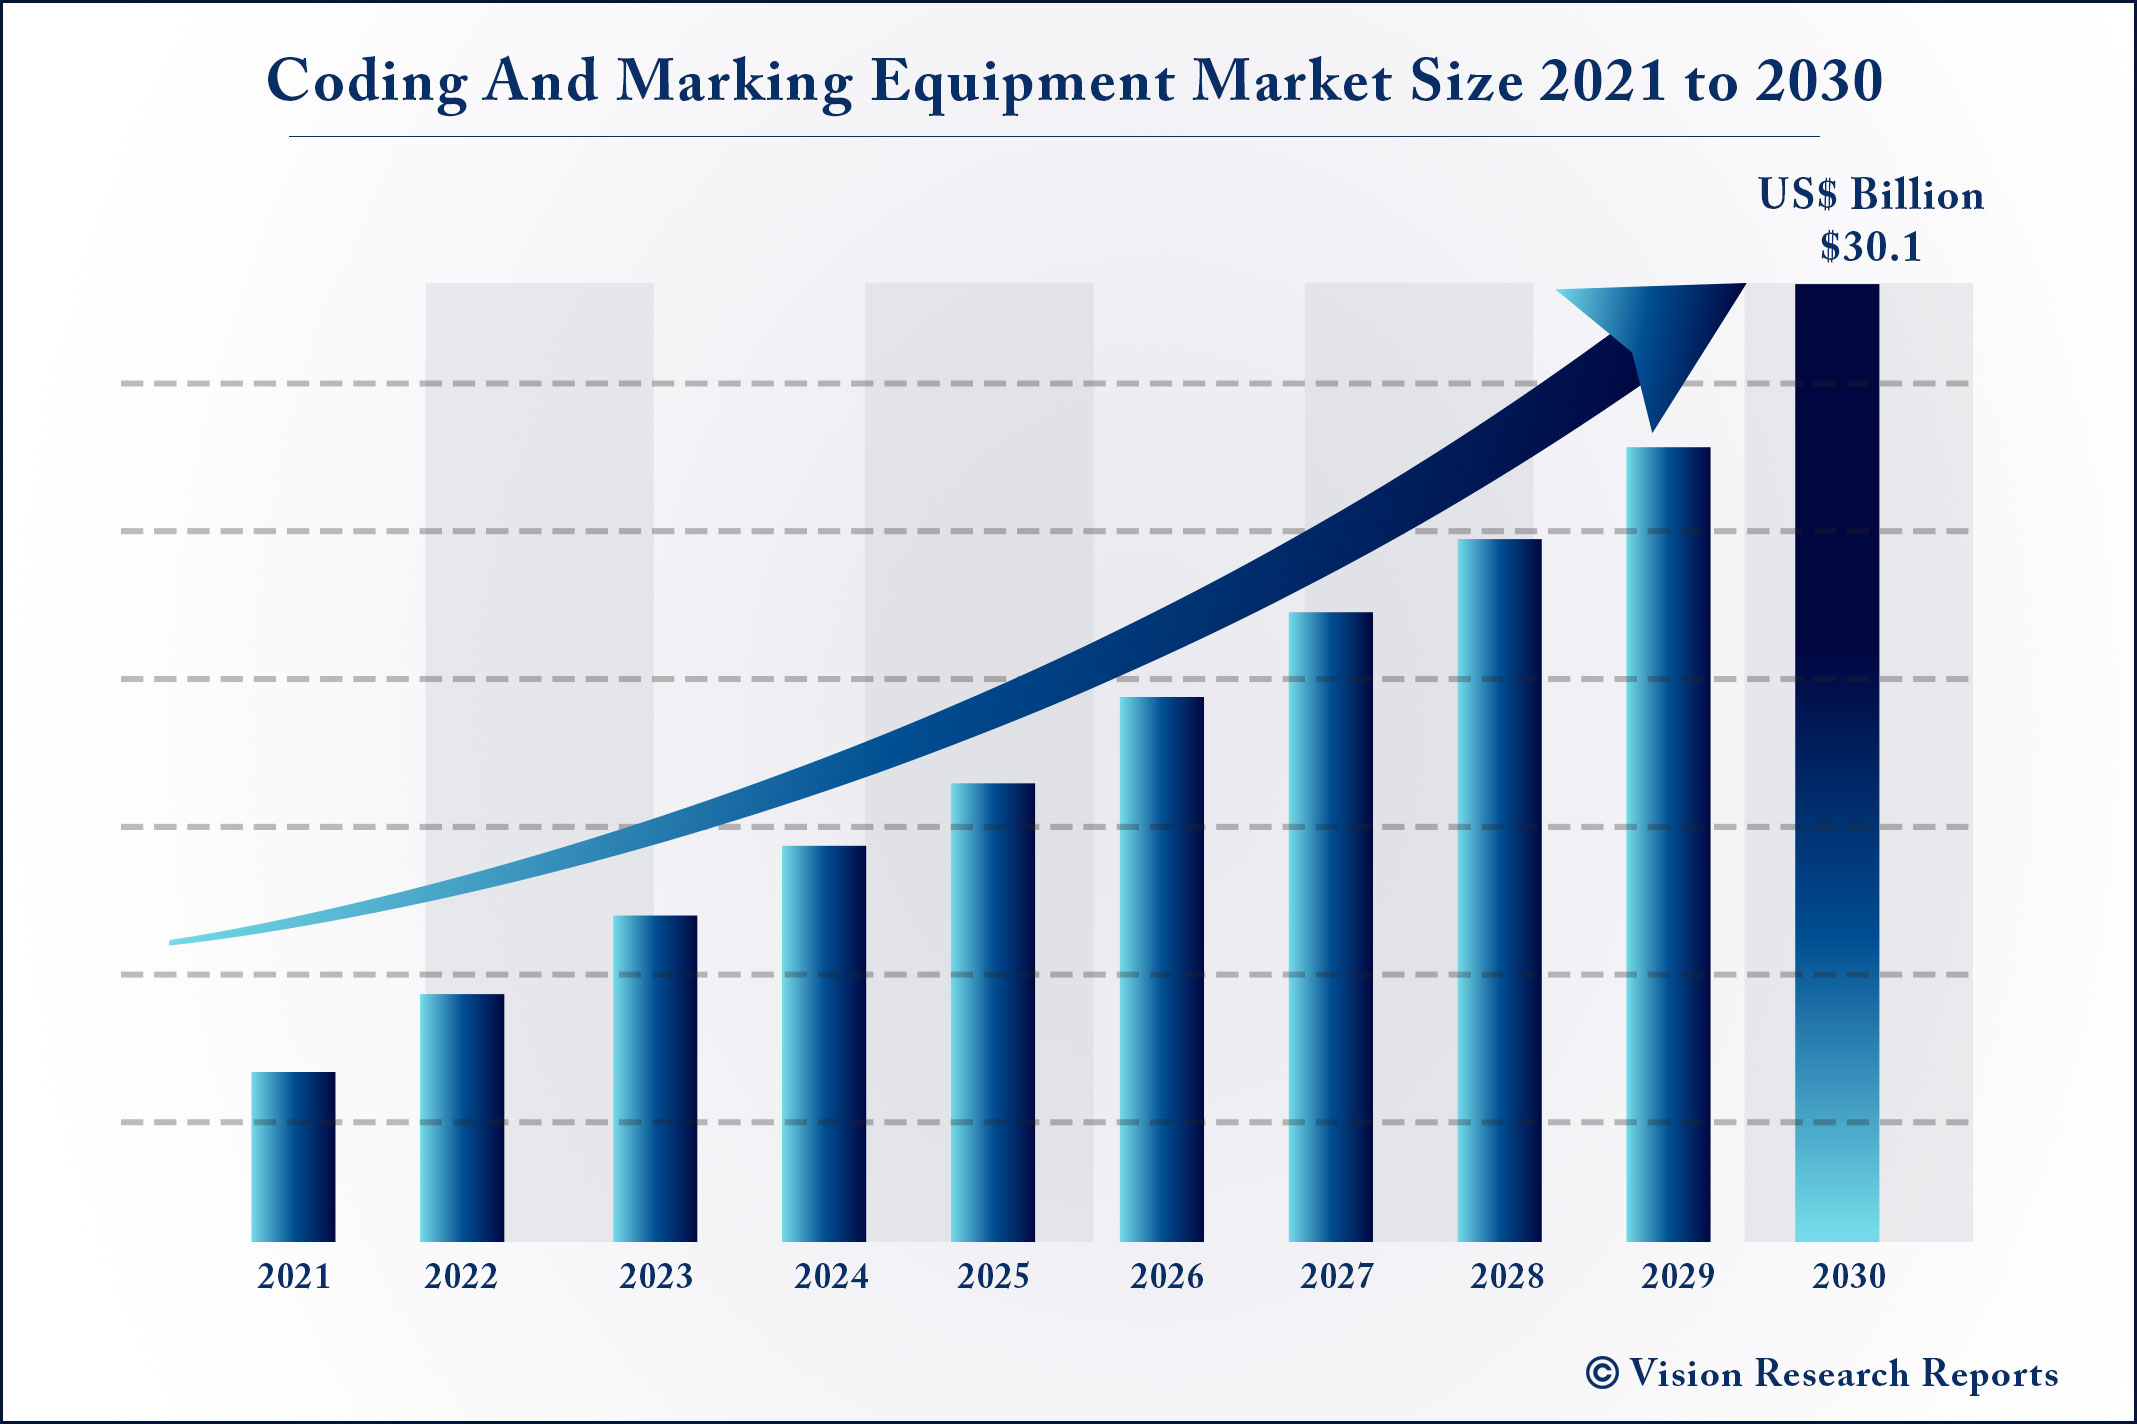 Coding And Marking Equipment Market Size 2021 to 2030